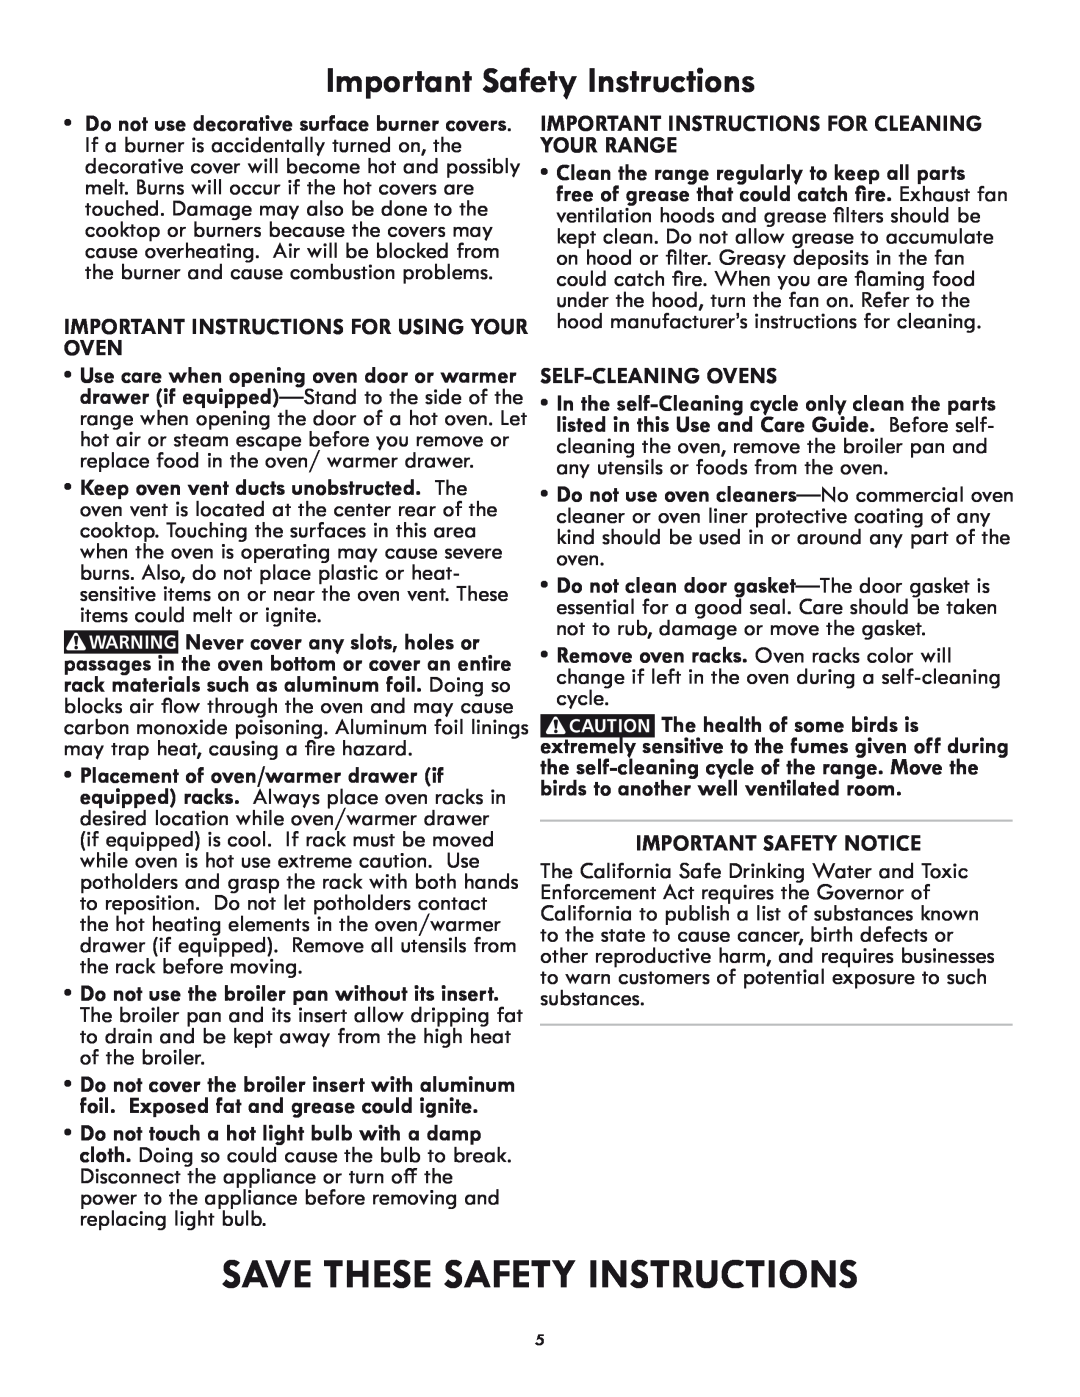 Kenmore 318205869A manual Save These Safety Instructions, Important Safety Instructions, Self-Cleaning Ovens 